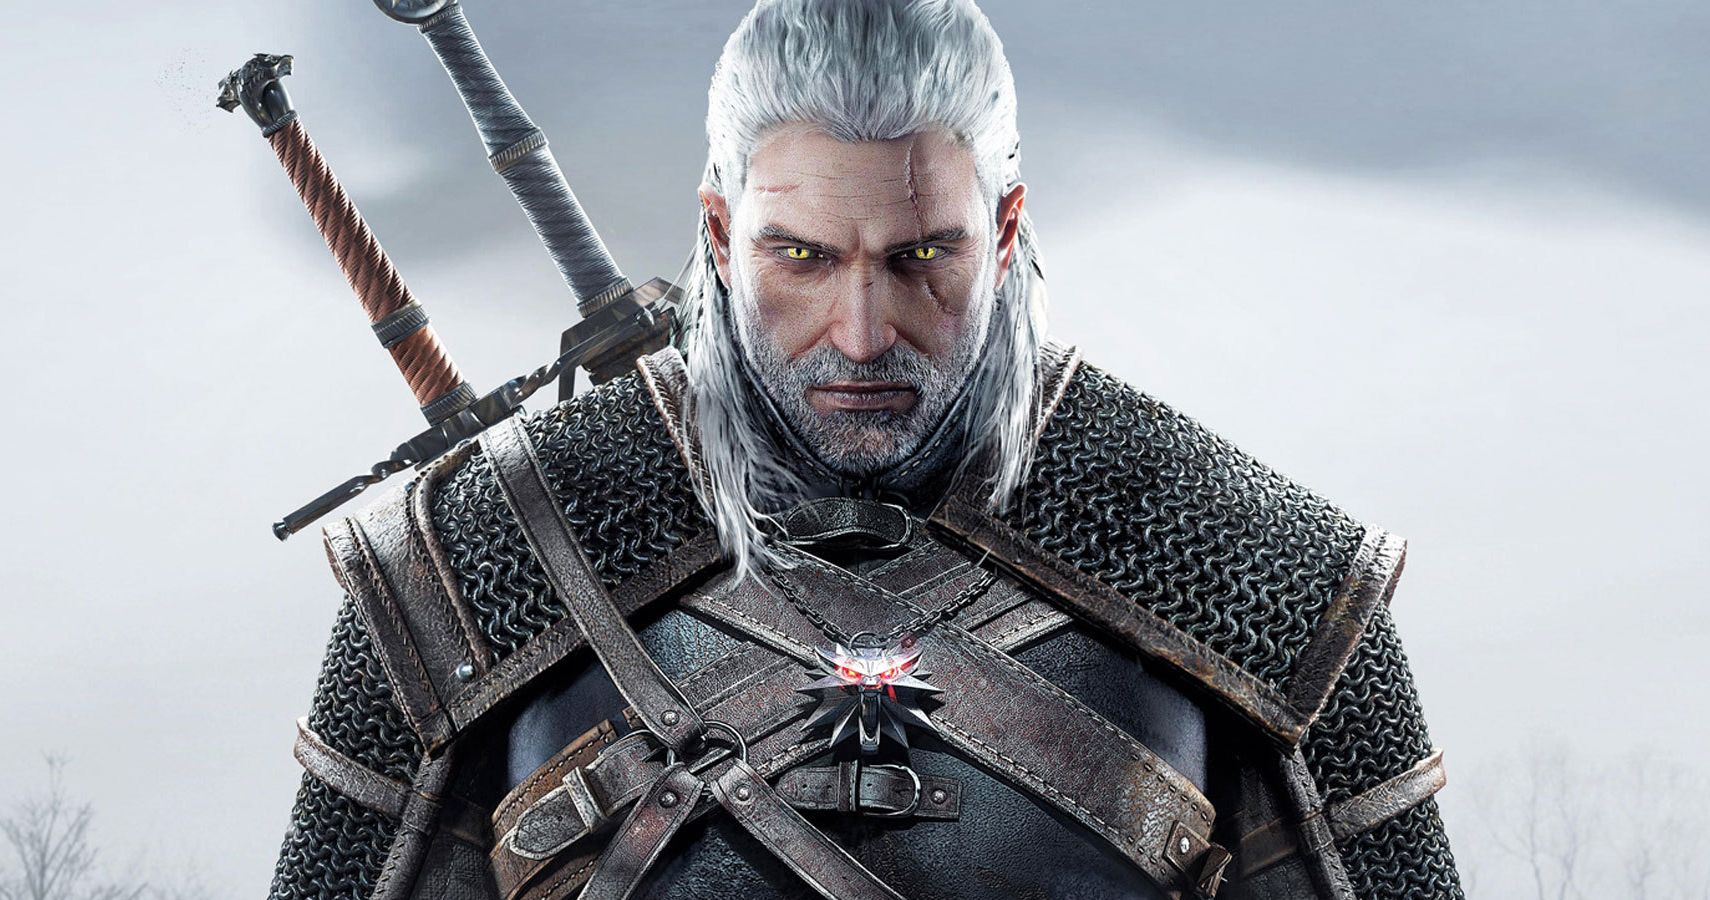 The Witcher: Hidden Details About Geralt Of Rivia Everyone Missed